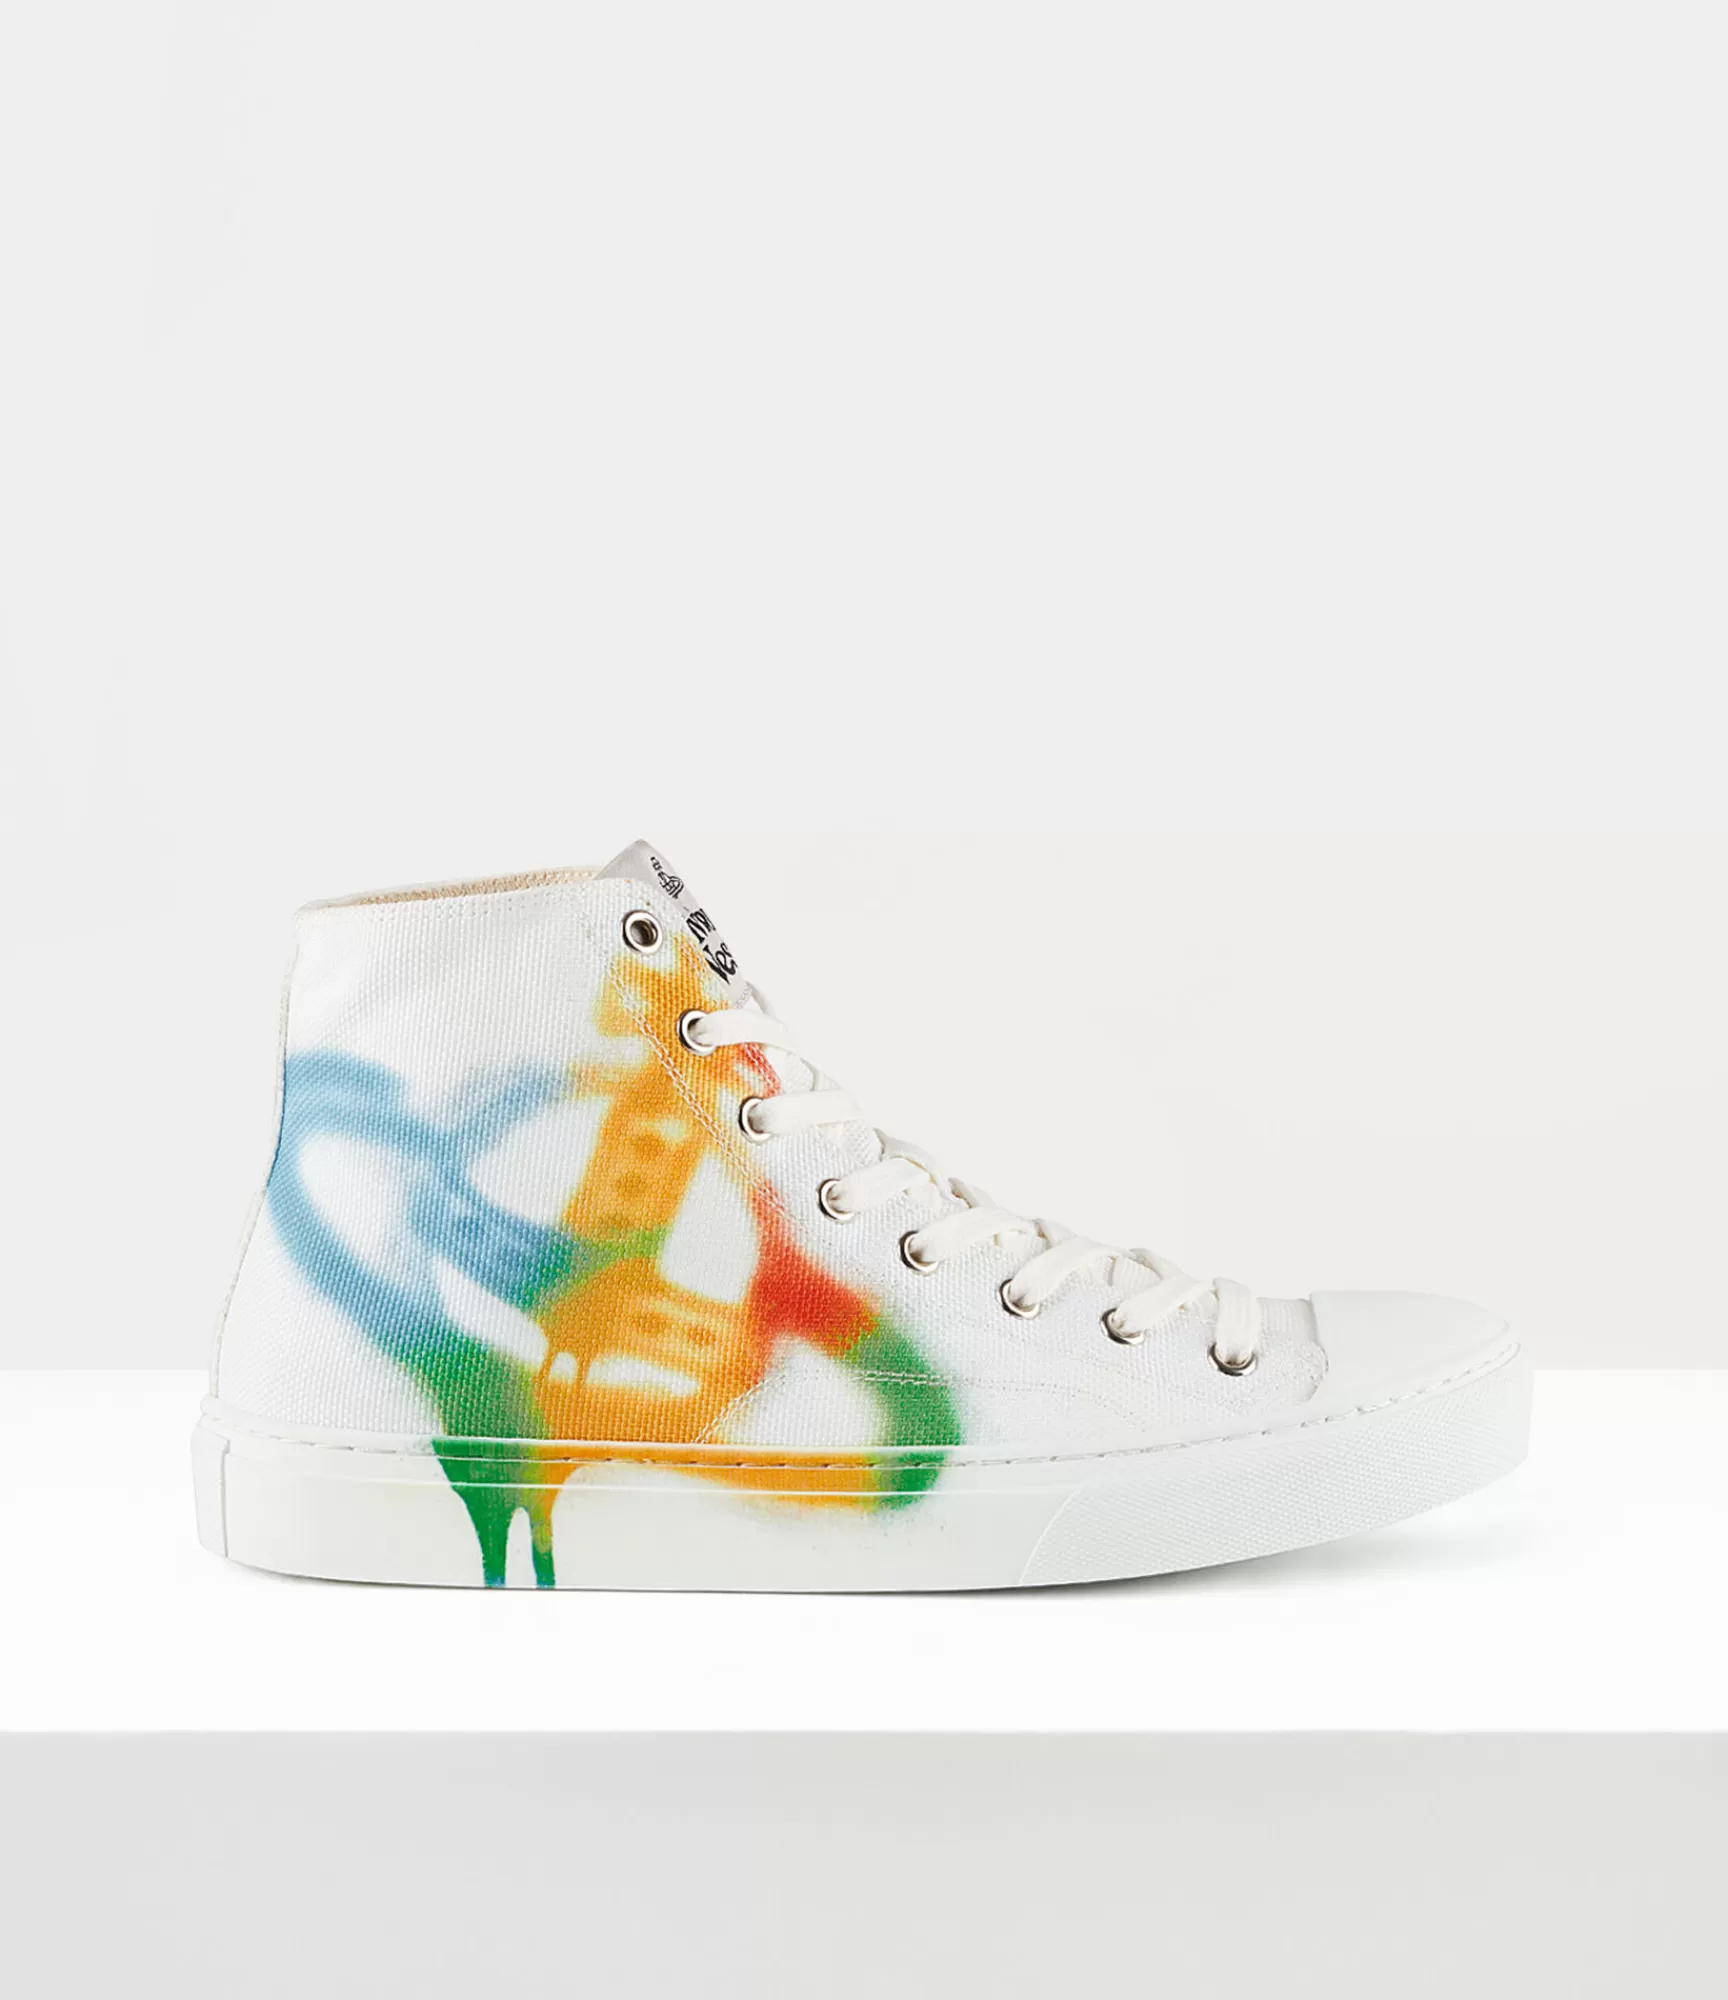 Vivienne Westwood Trainers*Plimsoll high top White/multi